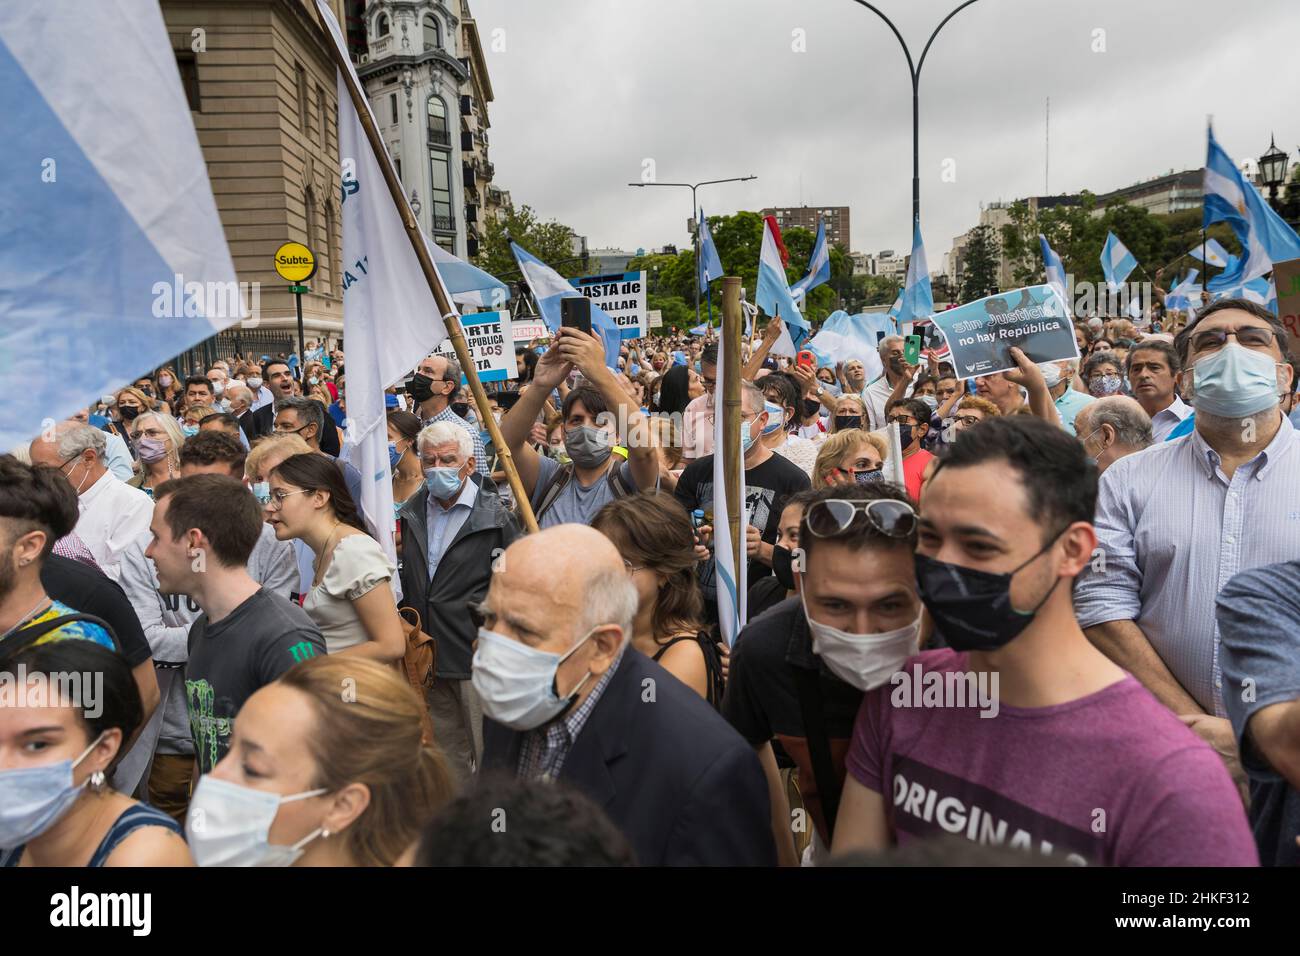 Ciudad De Buenos Aires, Argentina. 03rd Feb, 2022. Protesters in the march in front of the Courts building in defense of an independent justice. (Photo by Esteban Osorio/Pacific Press) Credit: Pacific Press Media Production Corp./Alamy Live News Stock Photo